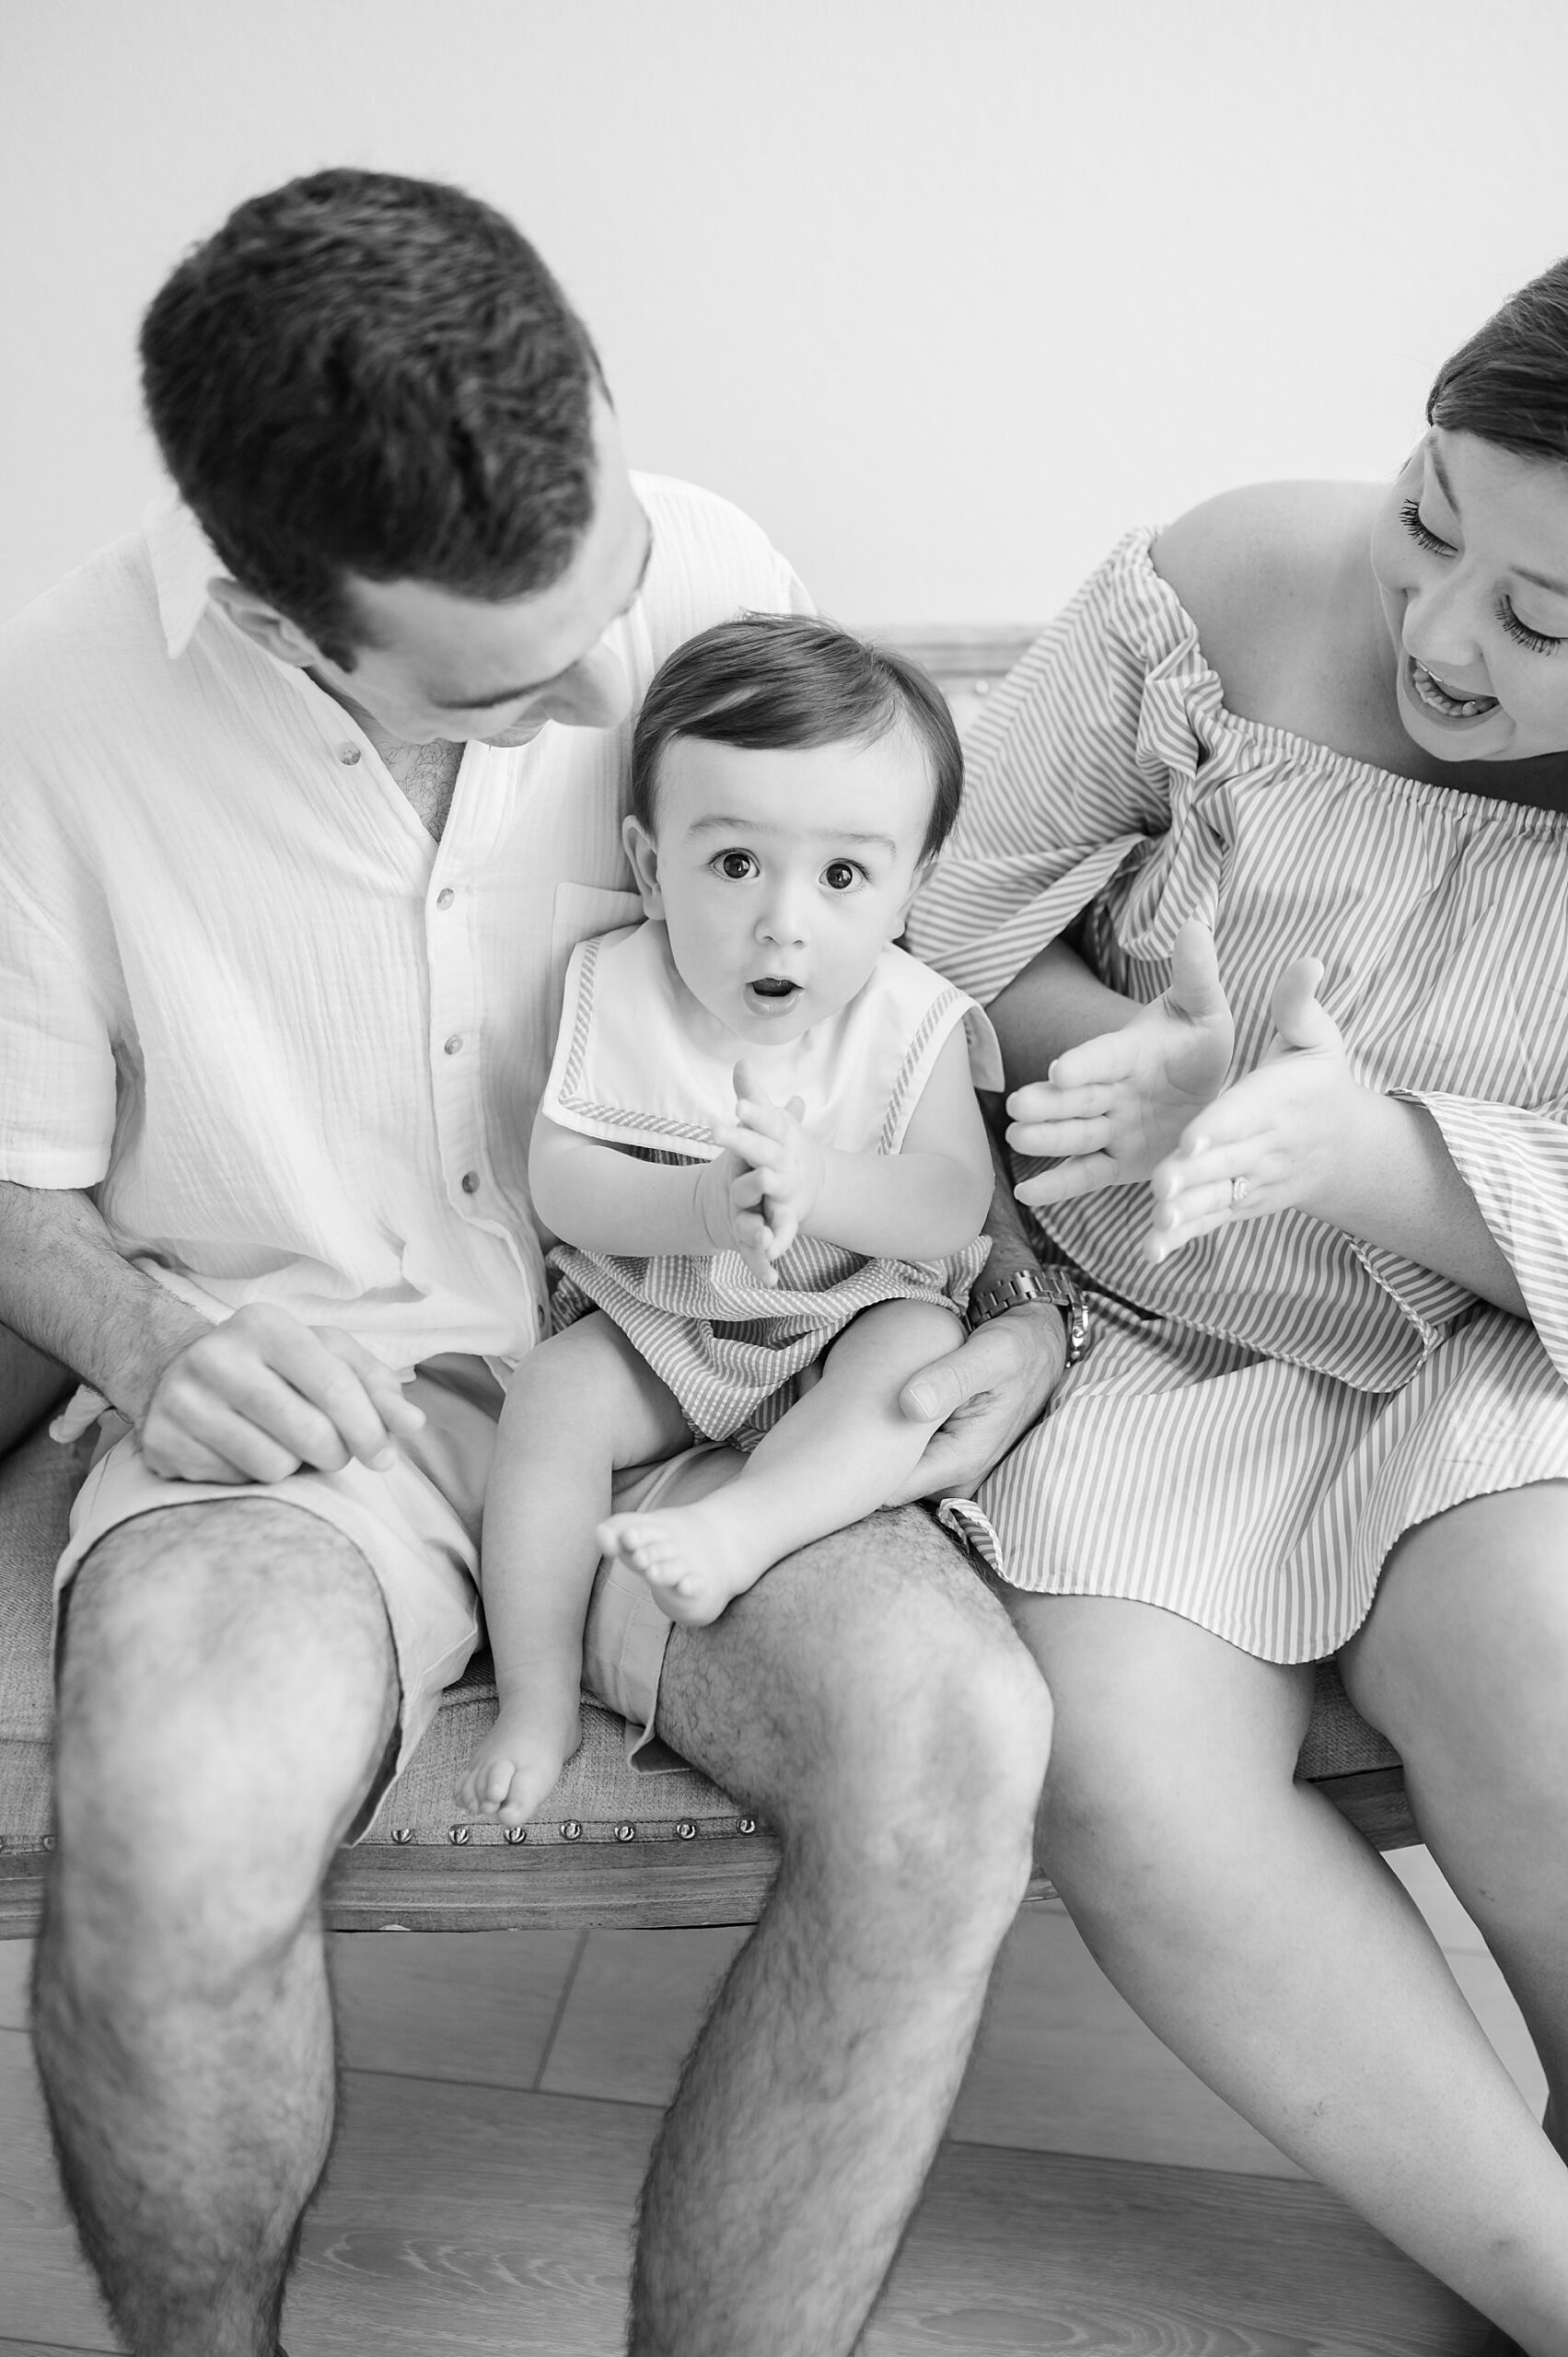 timeless family photos indoors taken by Lindsey Dutton Photography, a Dallas newborn photographer
